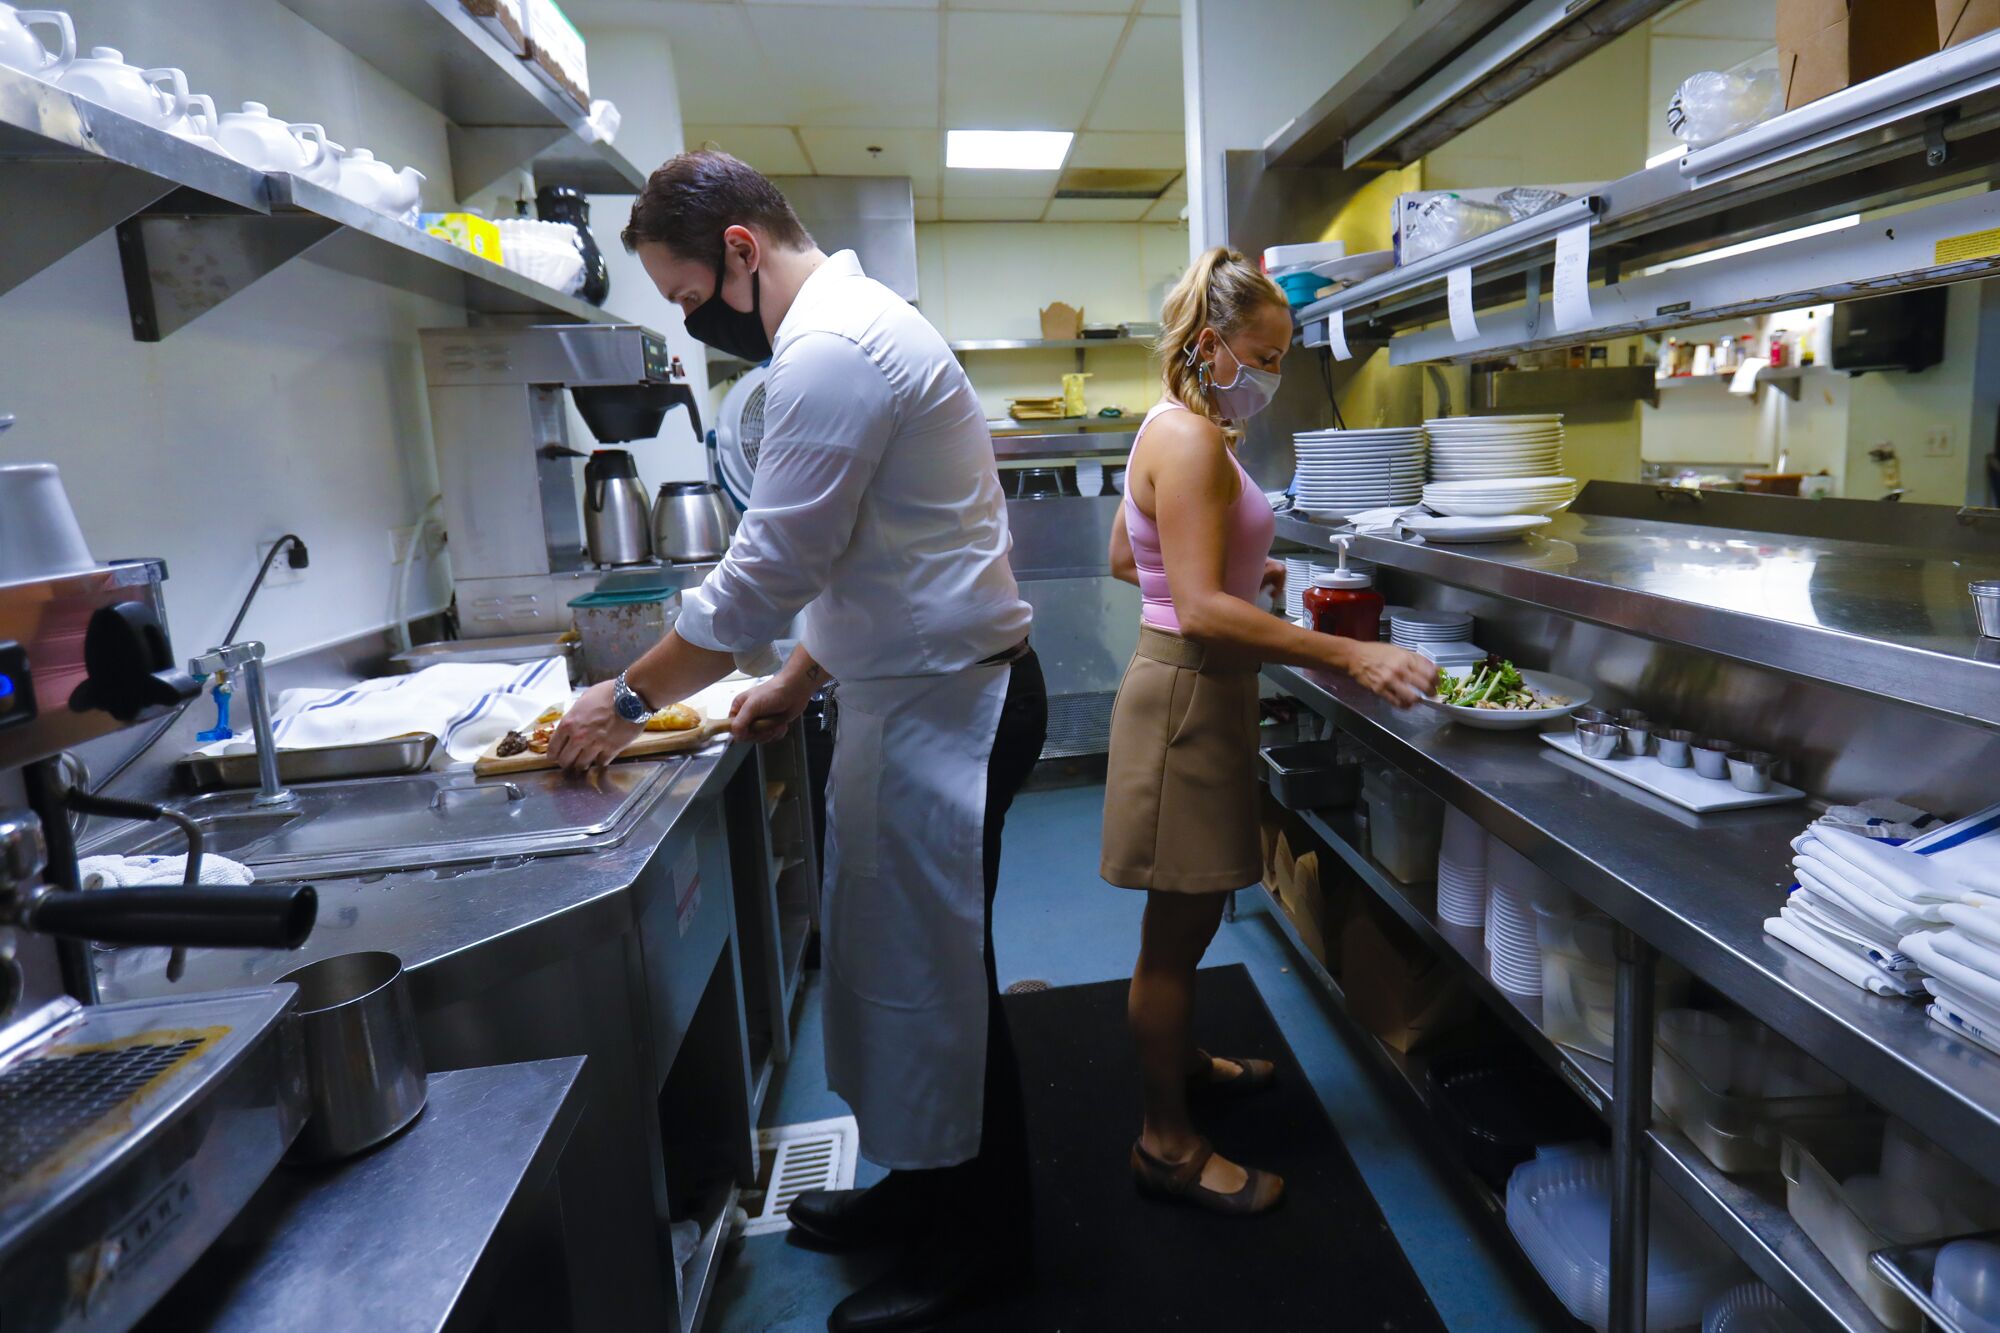 Kyle Burke and Samantha Scholl put the last touches on entrees to be taken to customers.